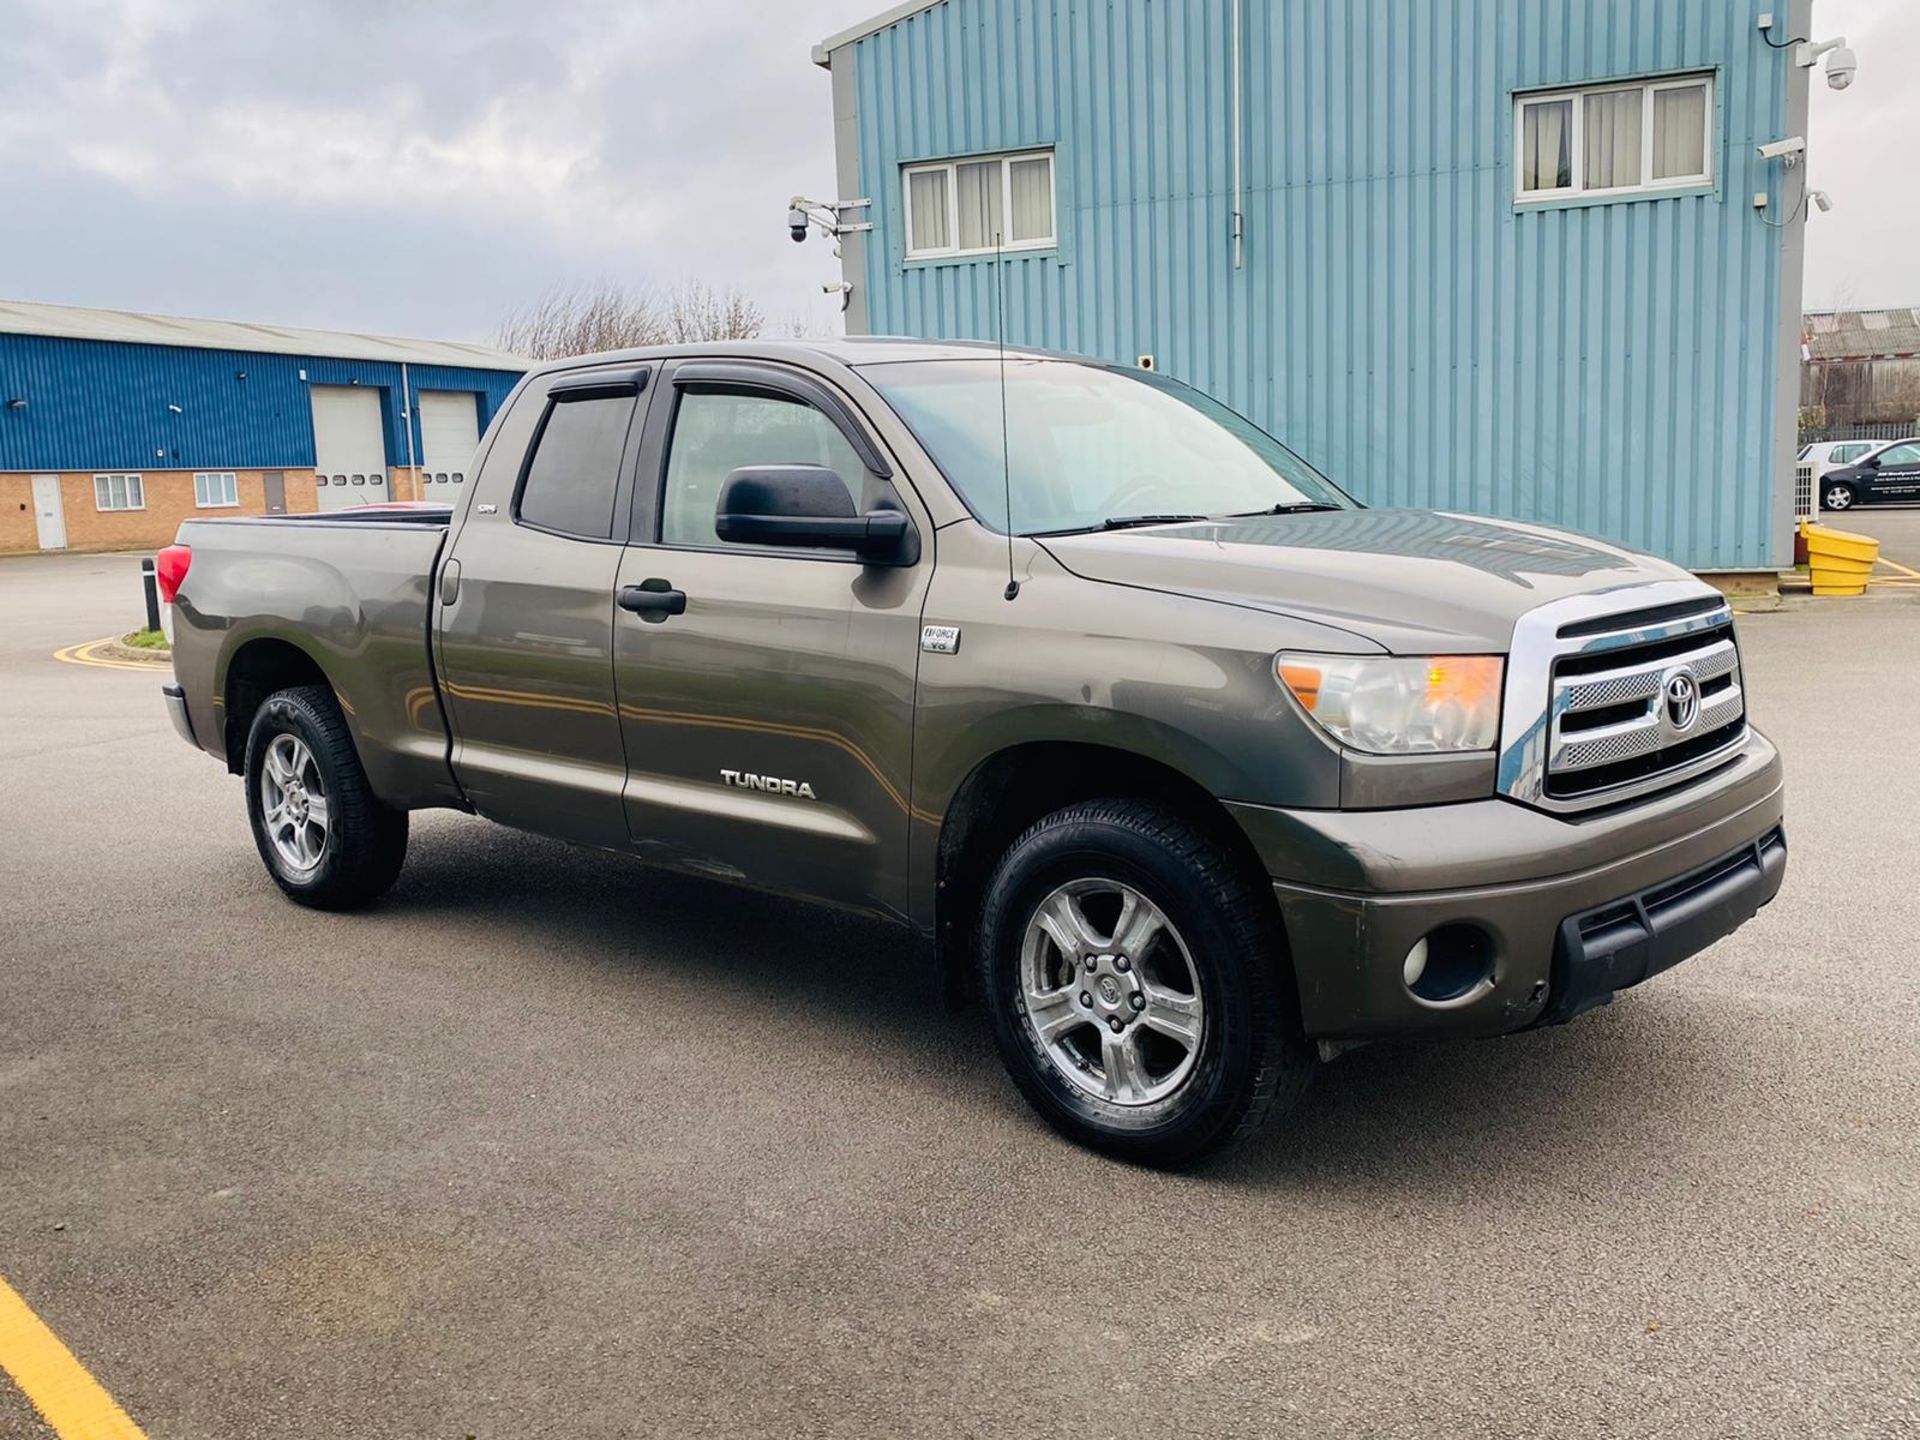 (RESERVE MET) TOYOTA TUNDRA 4.6 V8 SR5 SE DOUBLE-CAB - 2010 YEAR - AIR CON -FRESH IMPORT - - Image 2 of 24